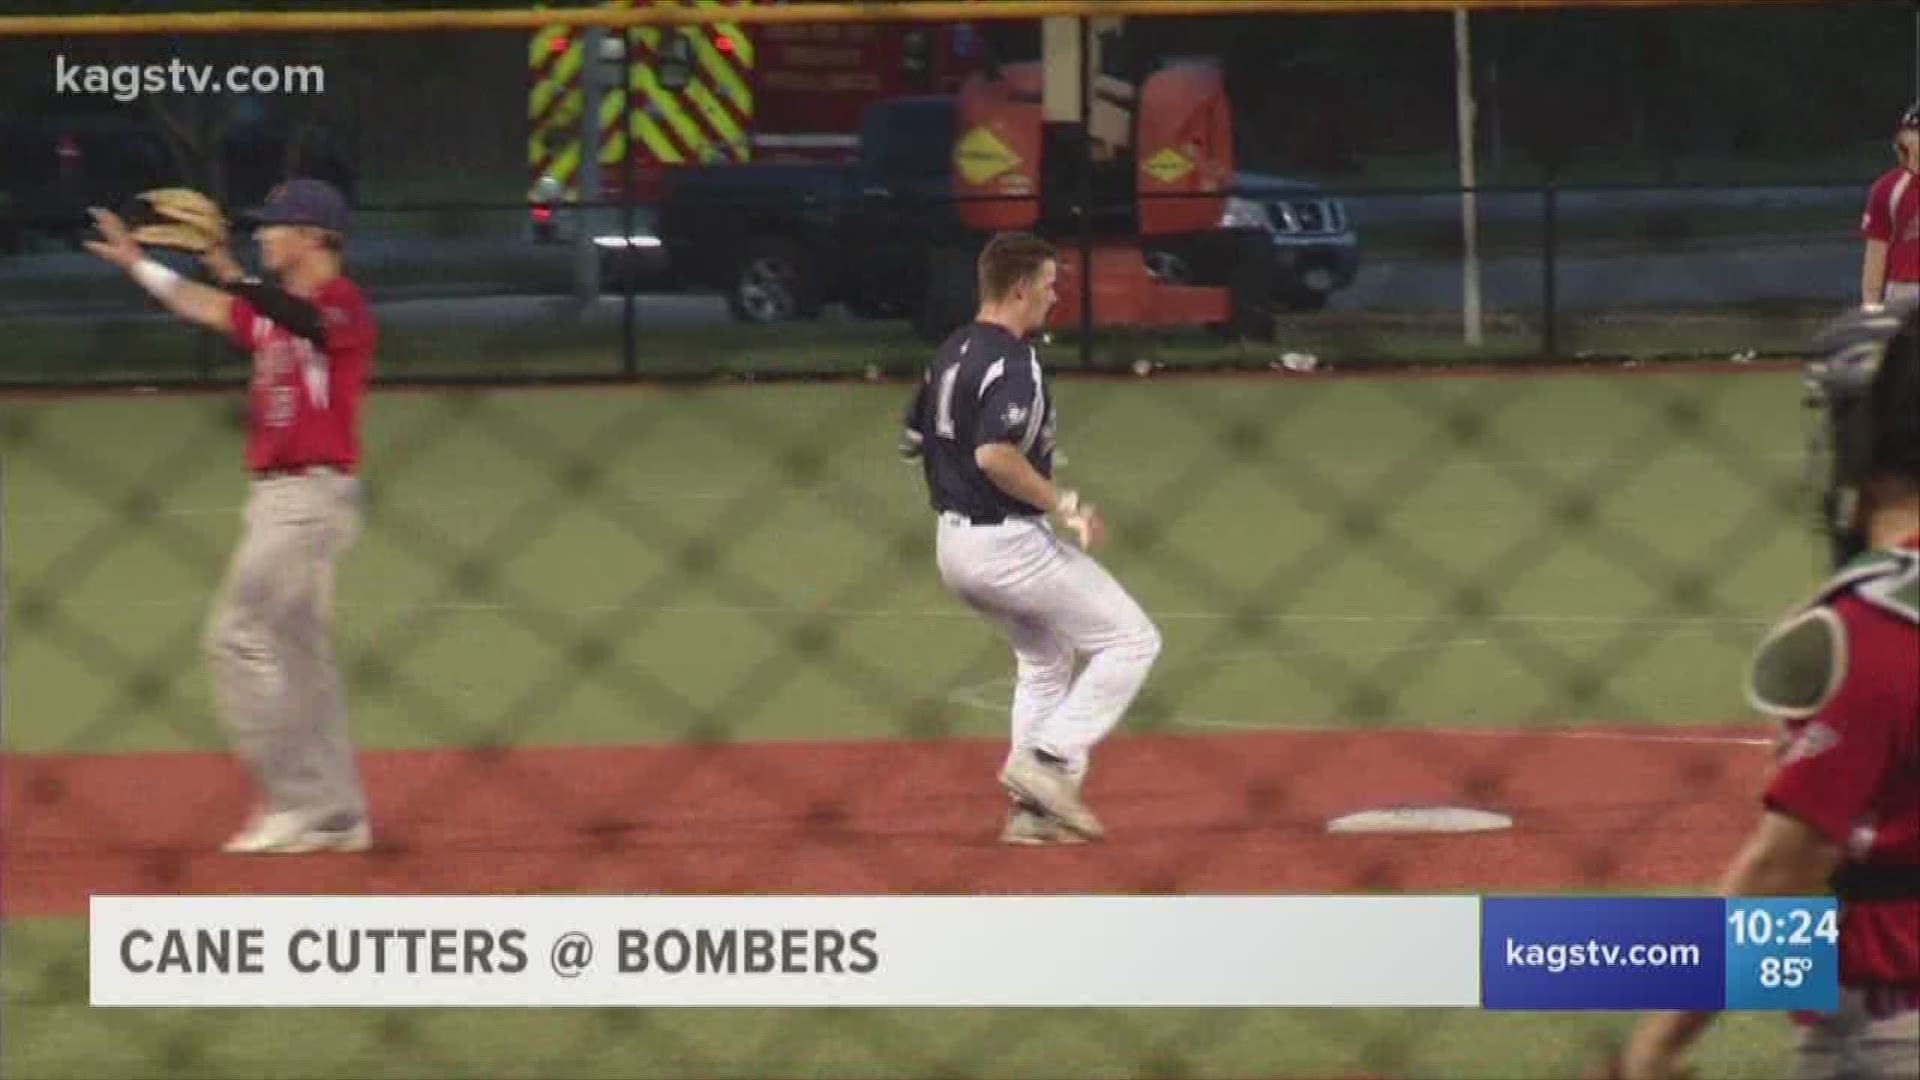 The Bombers defeated the Cane Cutters 8-1.